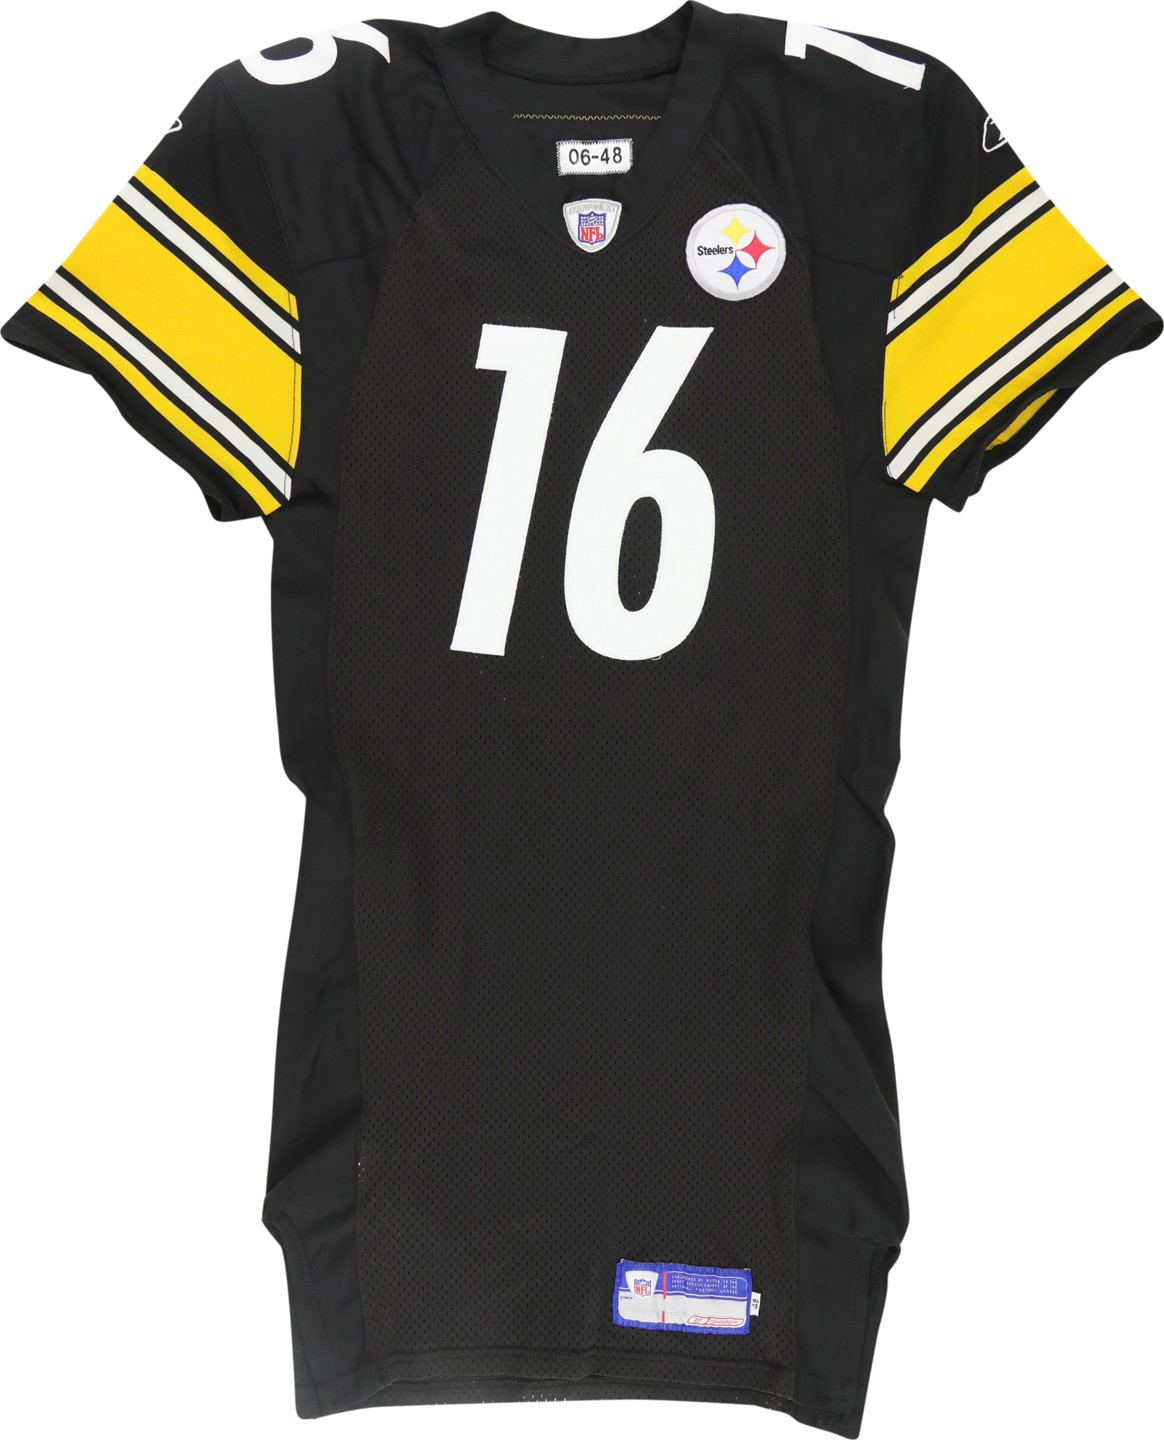 The Pittsburgh Steelers Game Worn Jersey Archive - 2006 Charlie Batch Pittsburgh Steelers Game Worn Jersey (Photo-Matched)